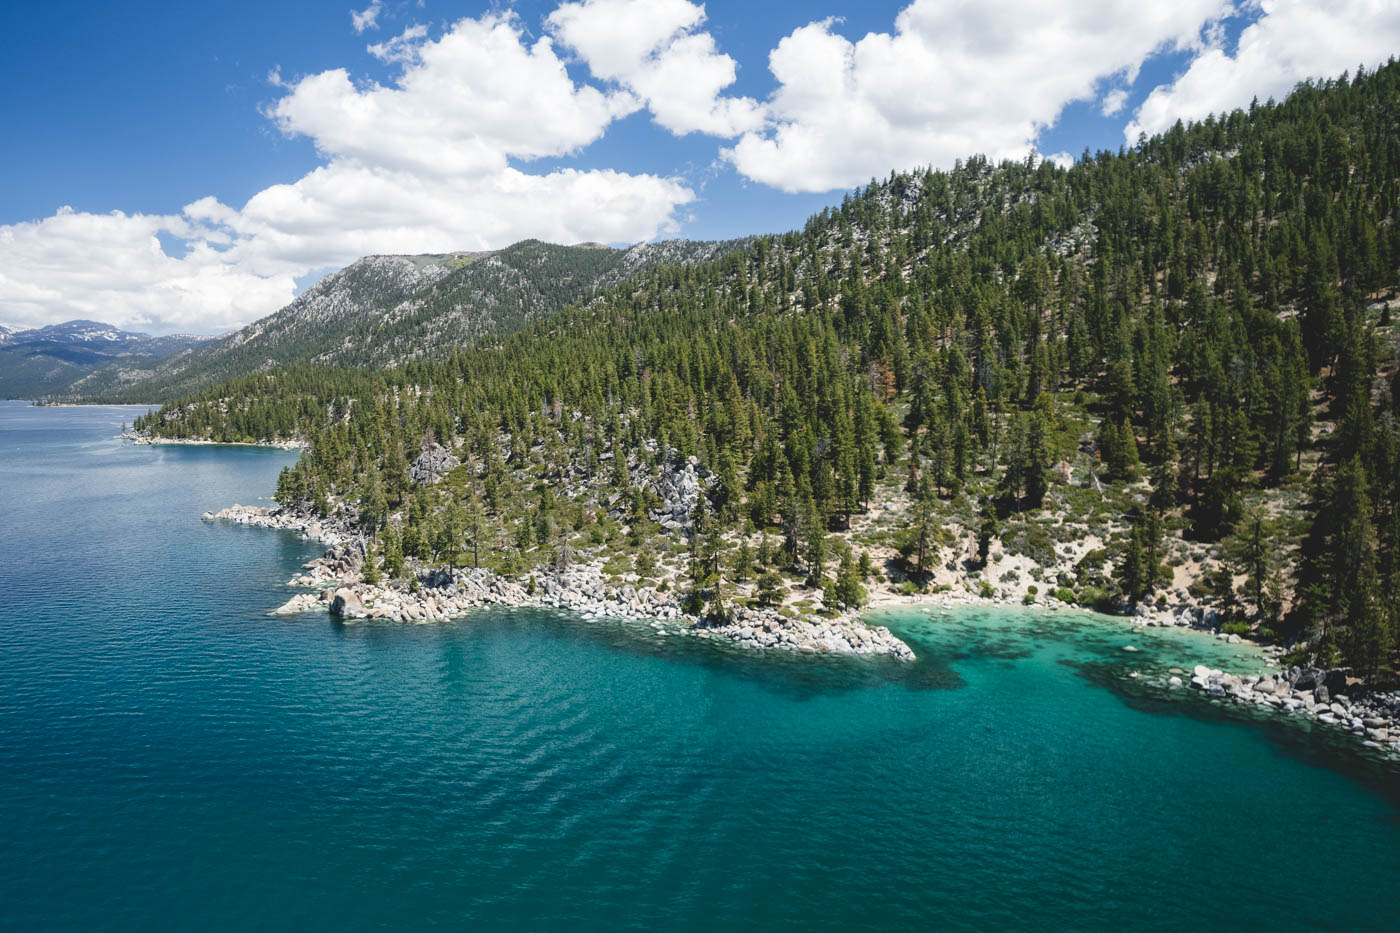 An aerial view of Secret Cove Beach along the shoreline of Lake Tahoe with trees lining the mountains around it.